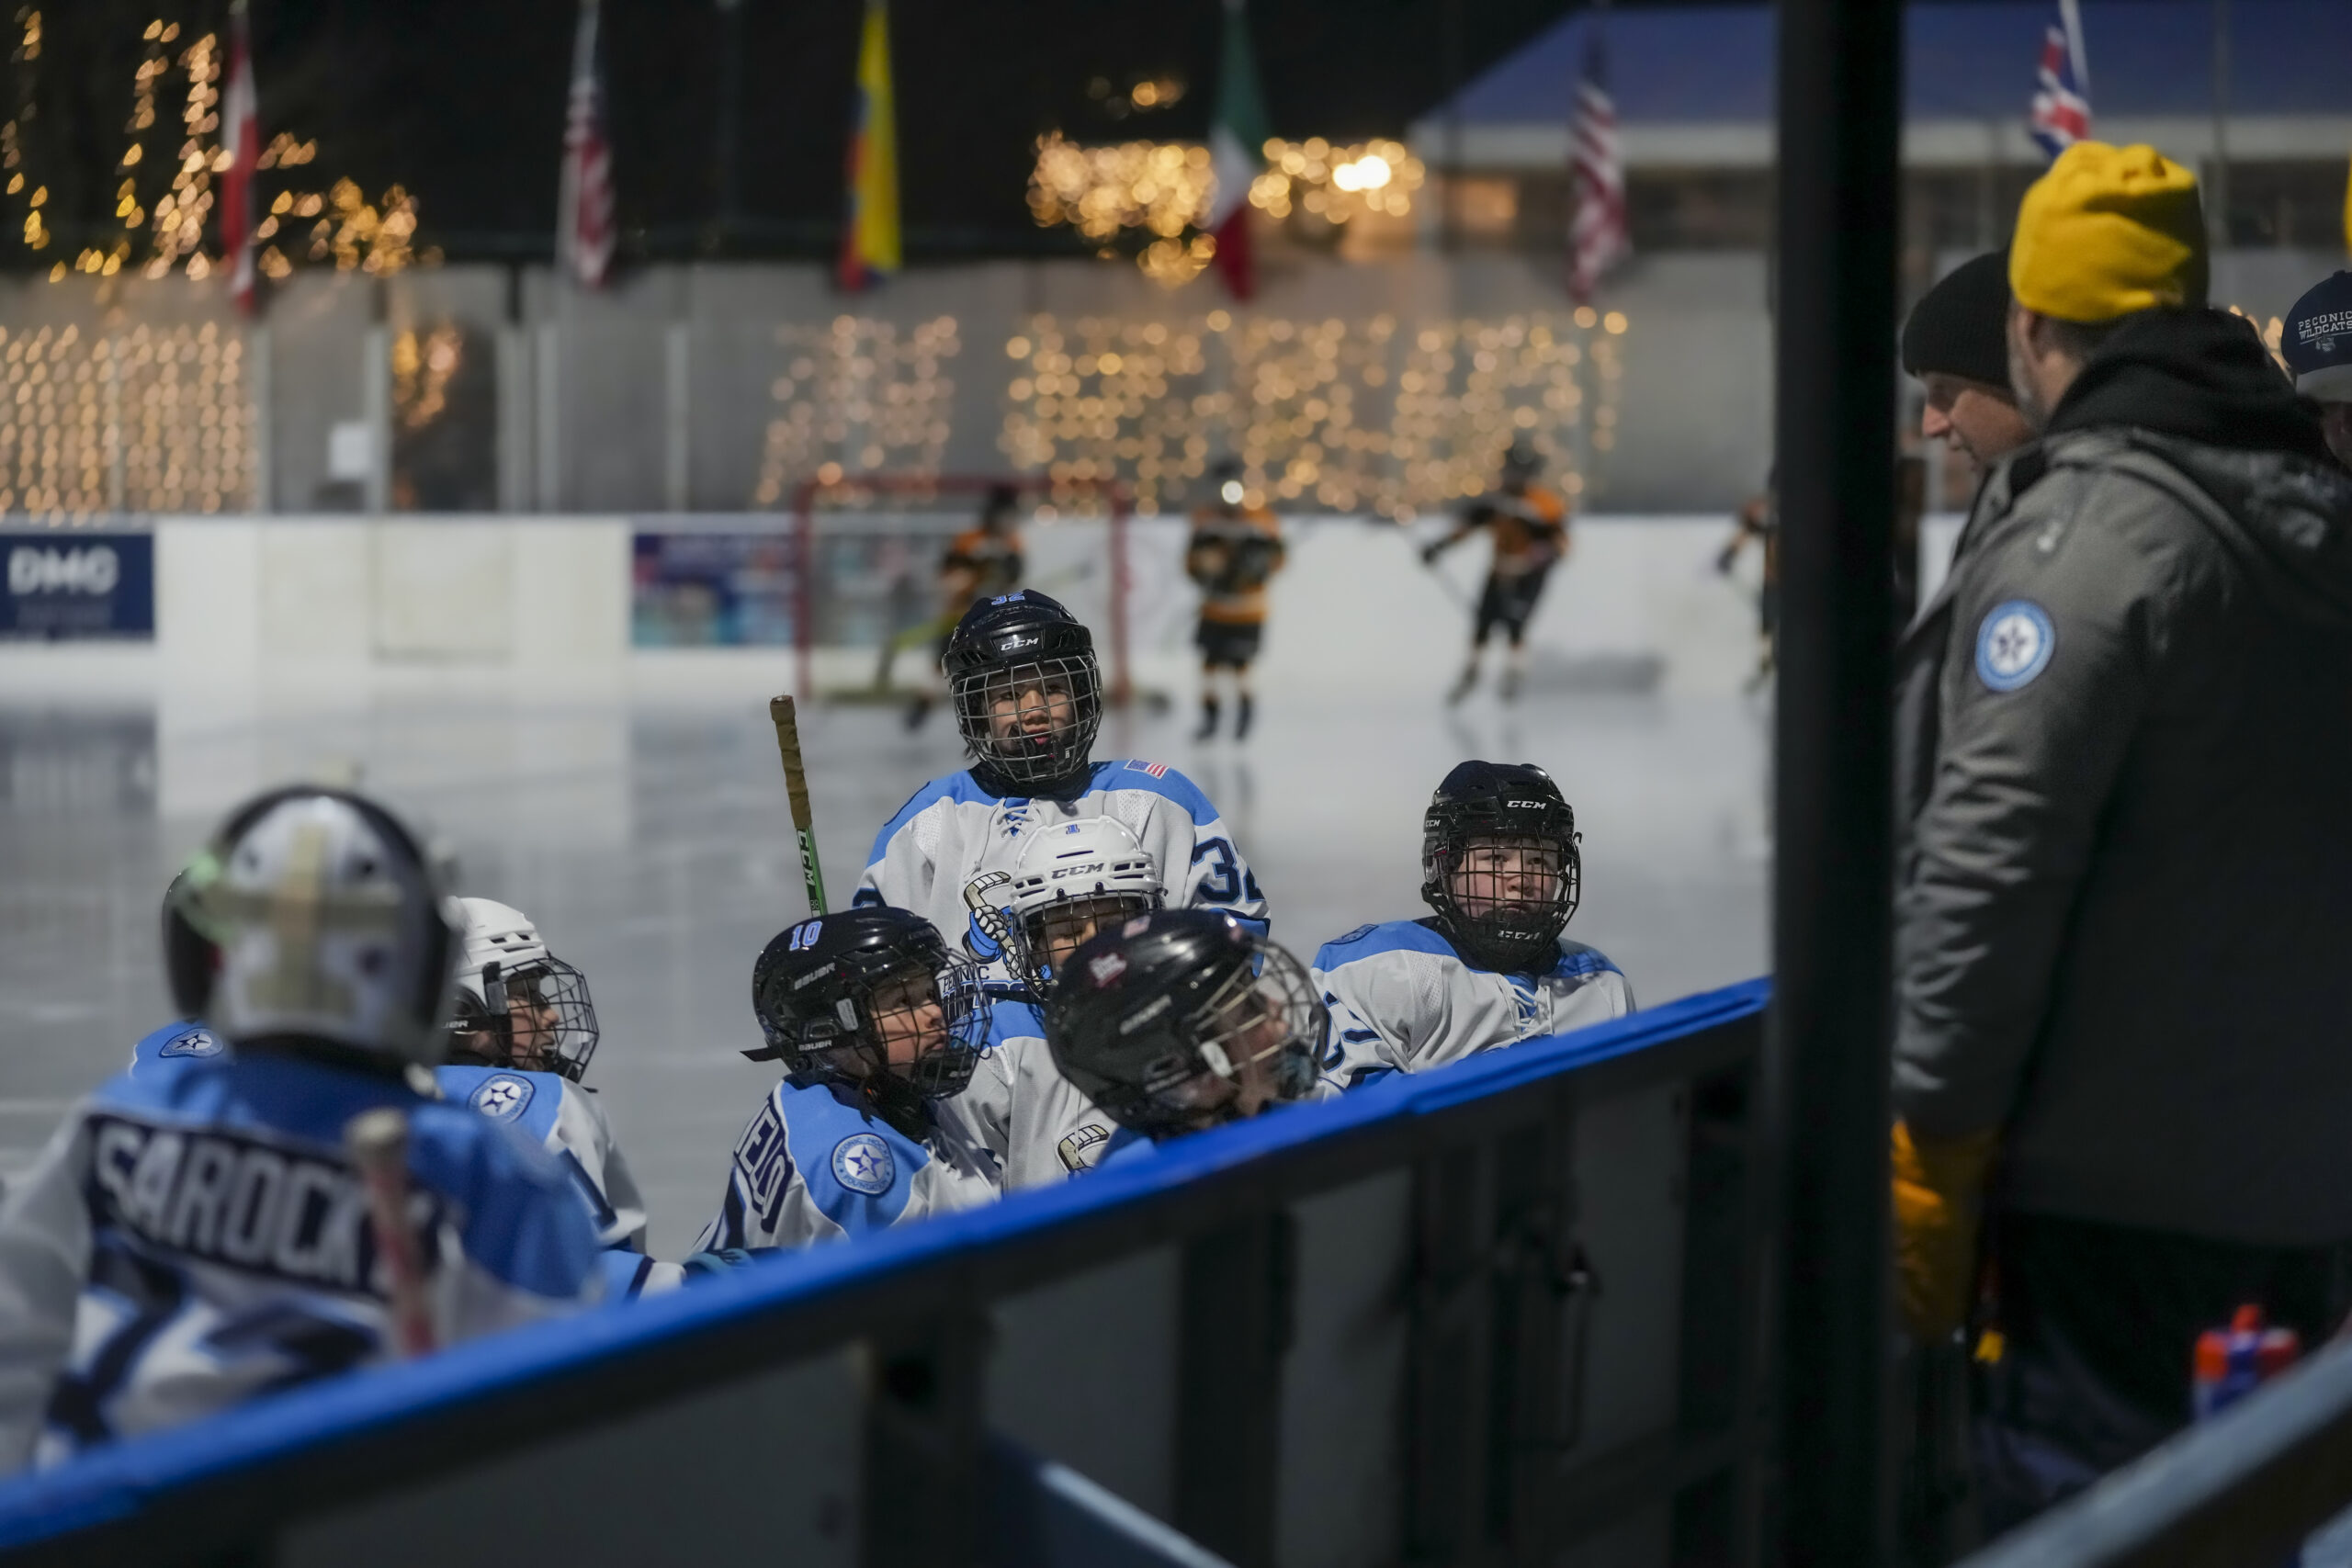 The Peconic Wildcats 10U team listens to their coaches from the ice during Saturday morning's game.    RON ESPOSITO